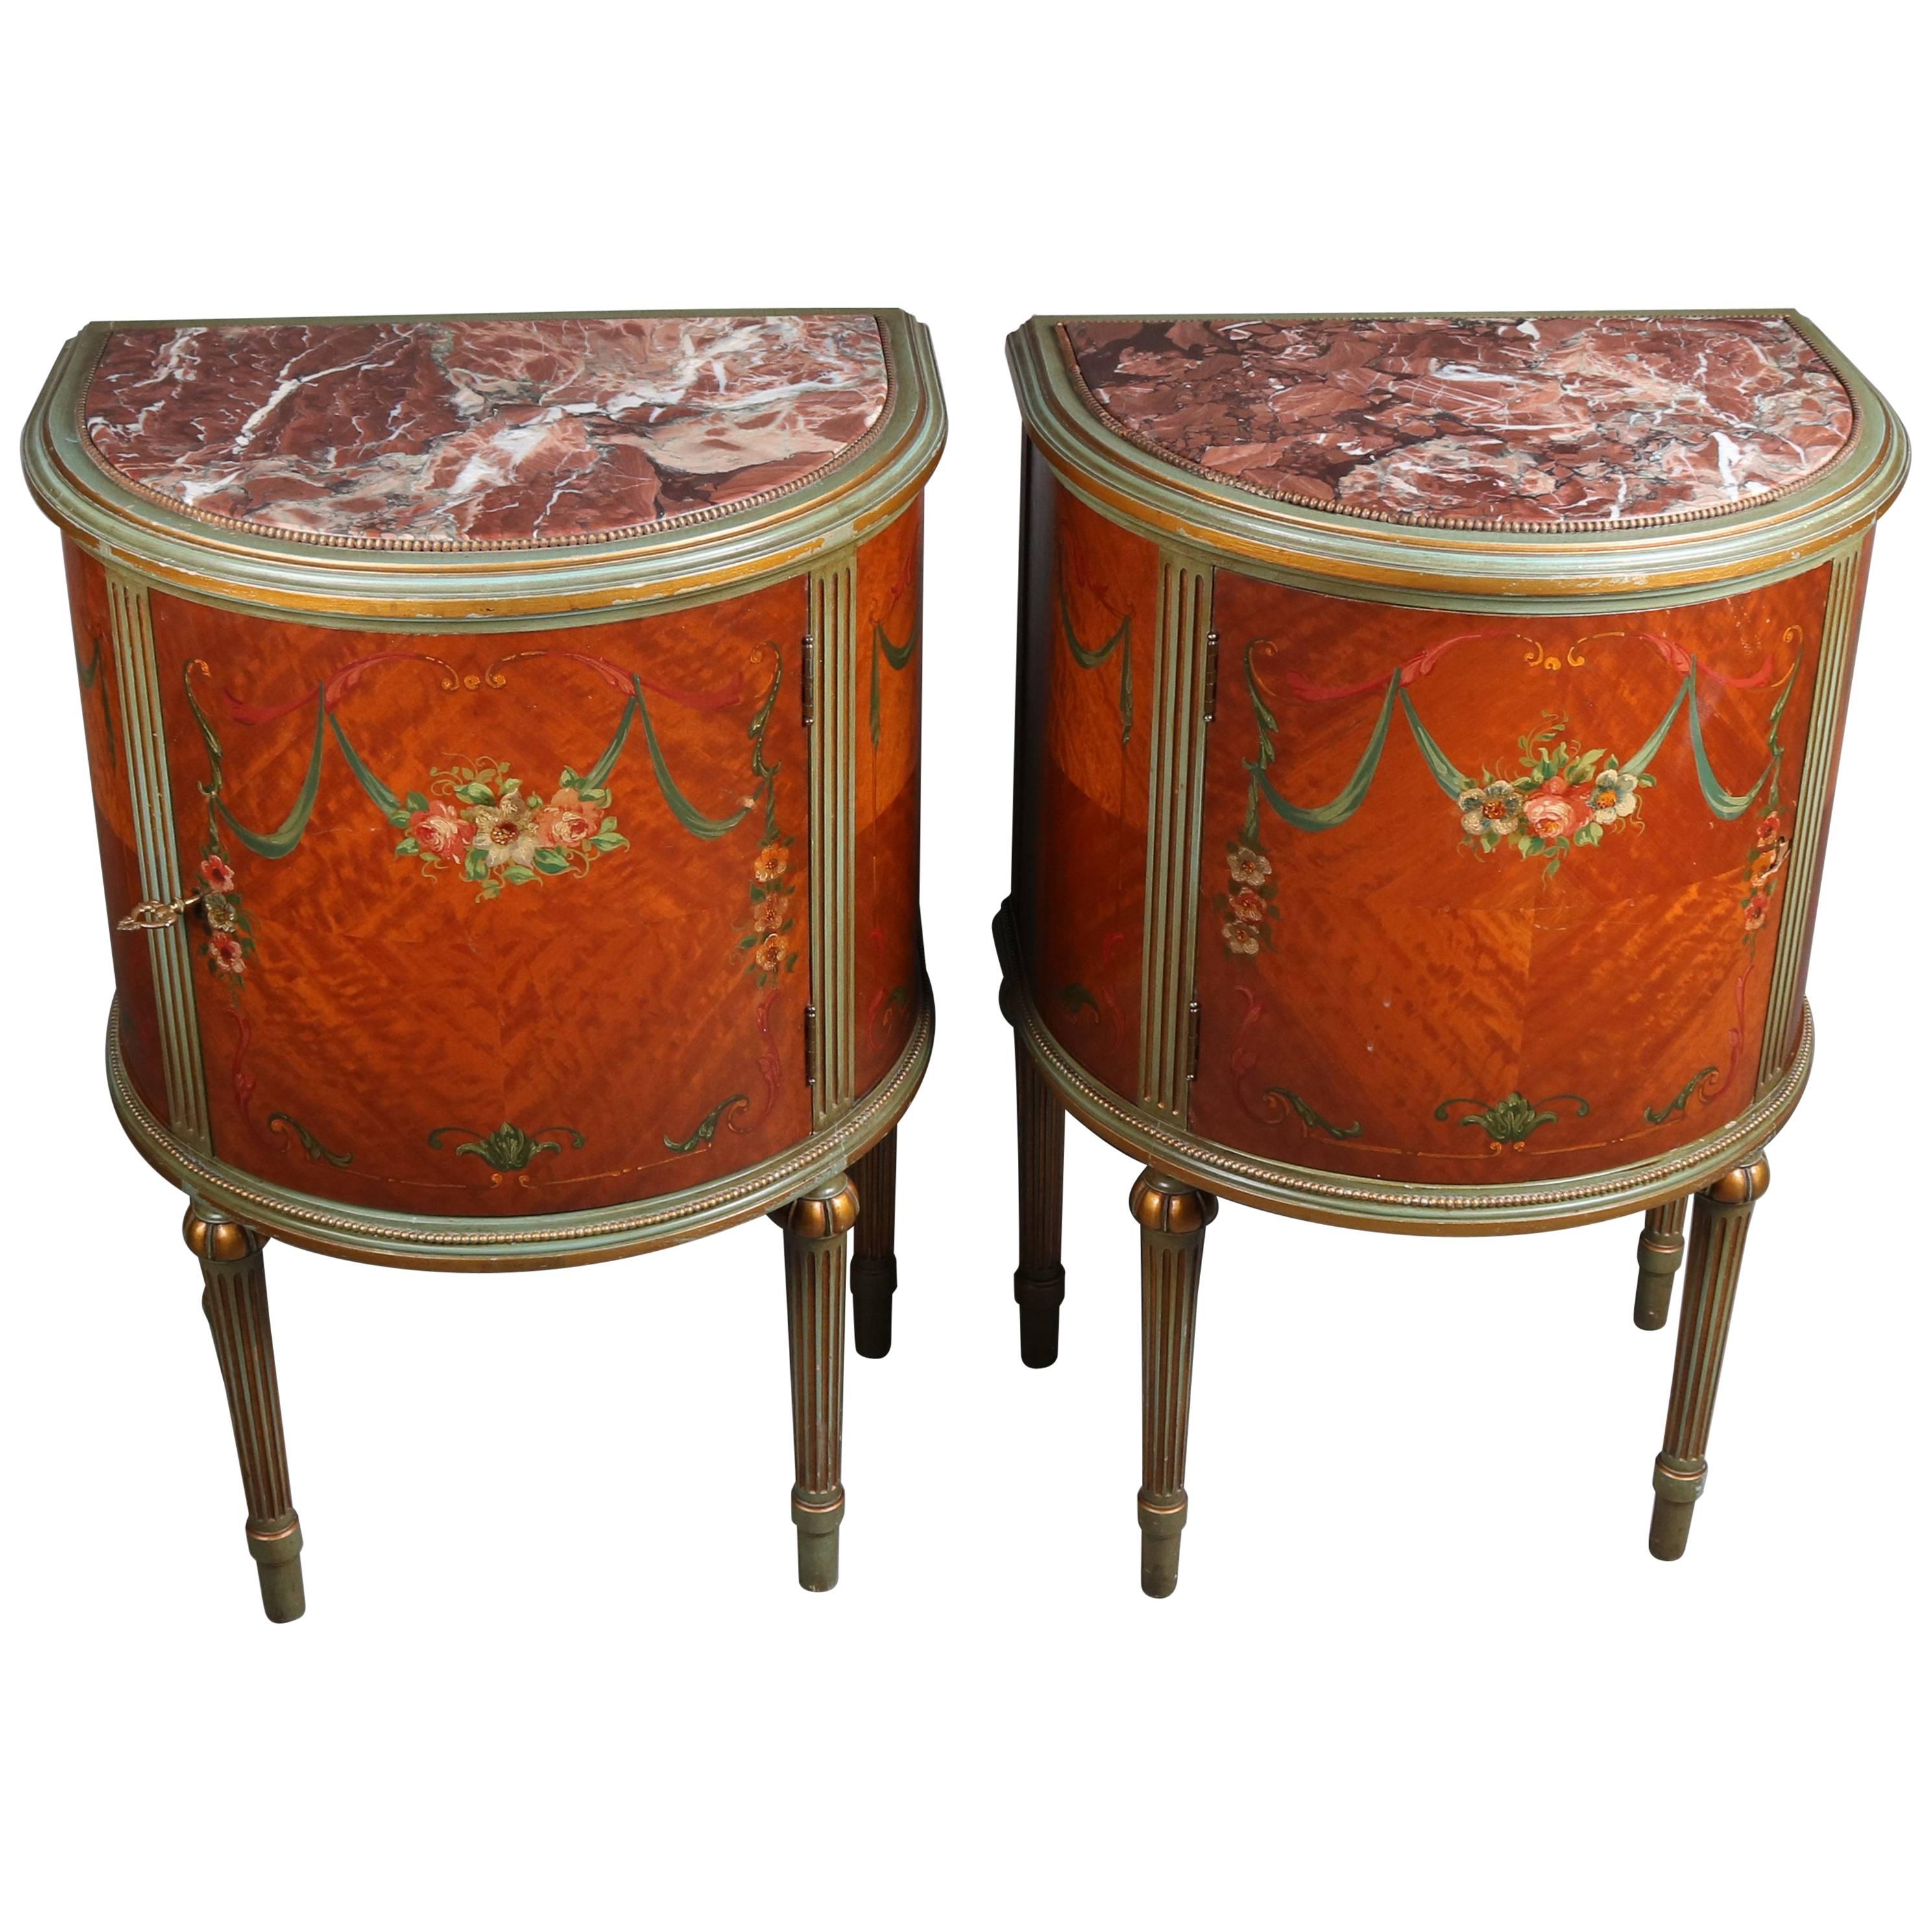 Pair of Adam Style Classical Painted and Gilt Carved Satinwood Demilune Stands